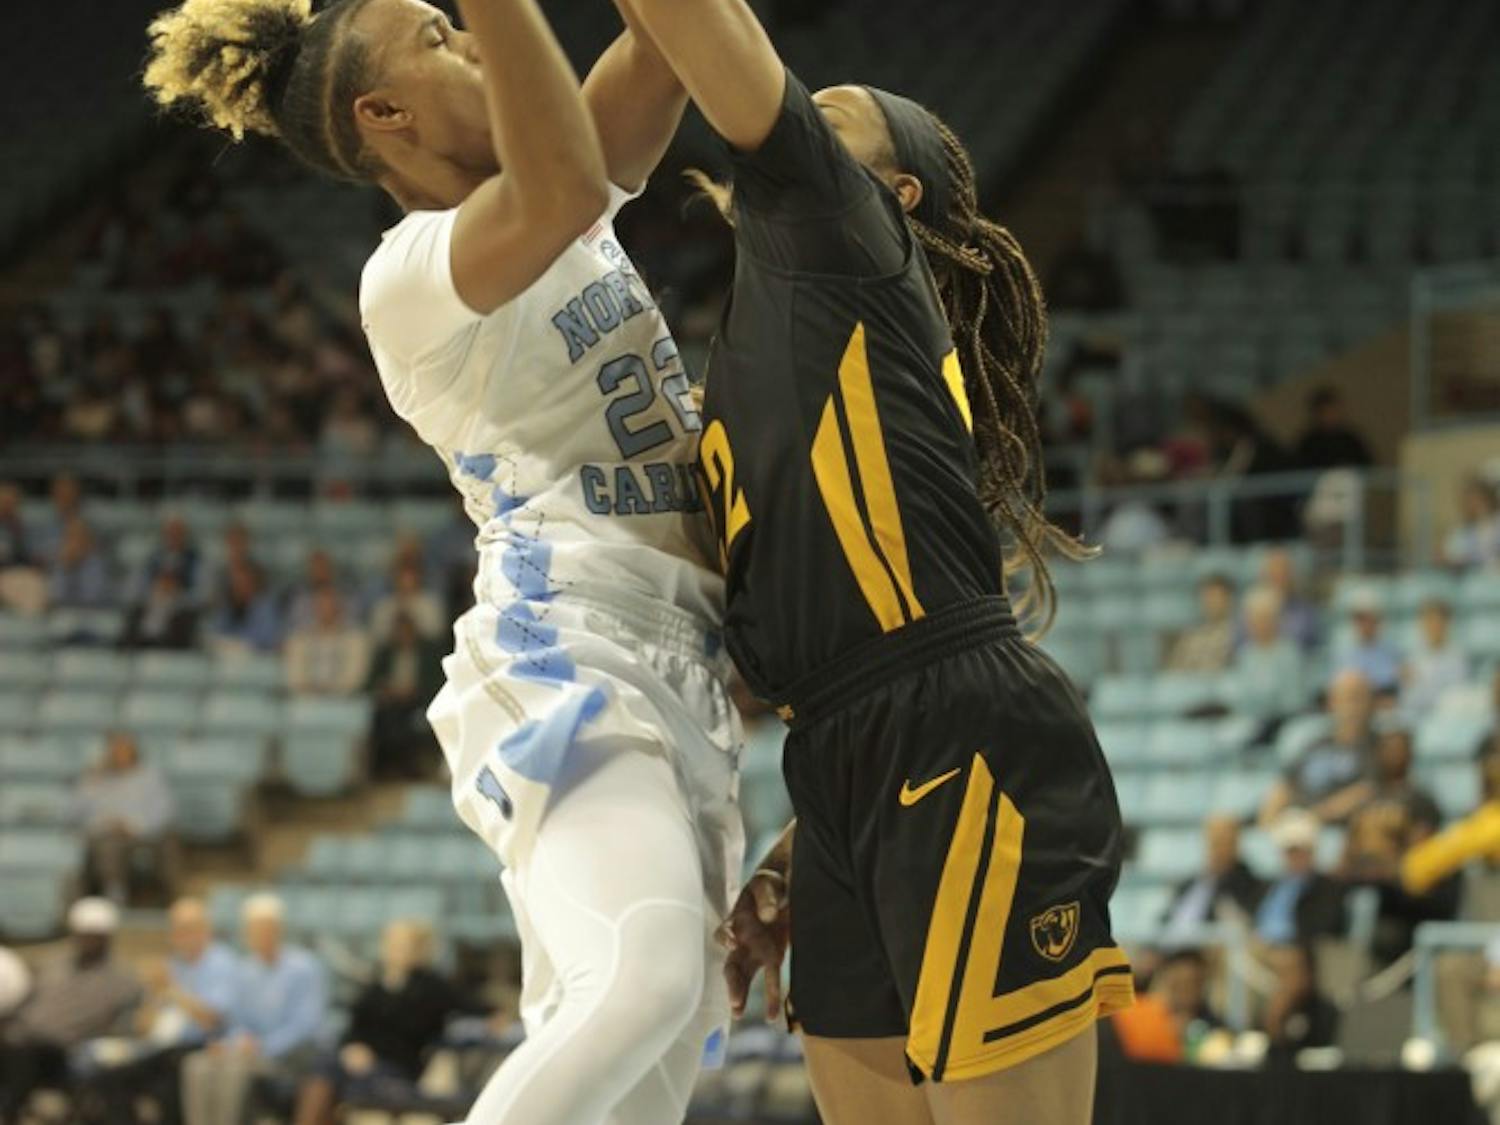 Senior guard Paris Kea (22) goes up for a basket during Wednesday's game against Virginia Commonwealth University at Carmichael Arena. UNC won 59-47.